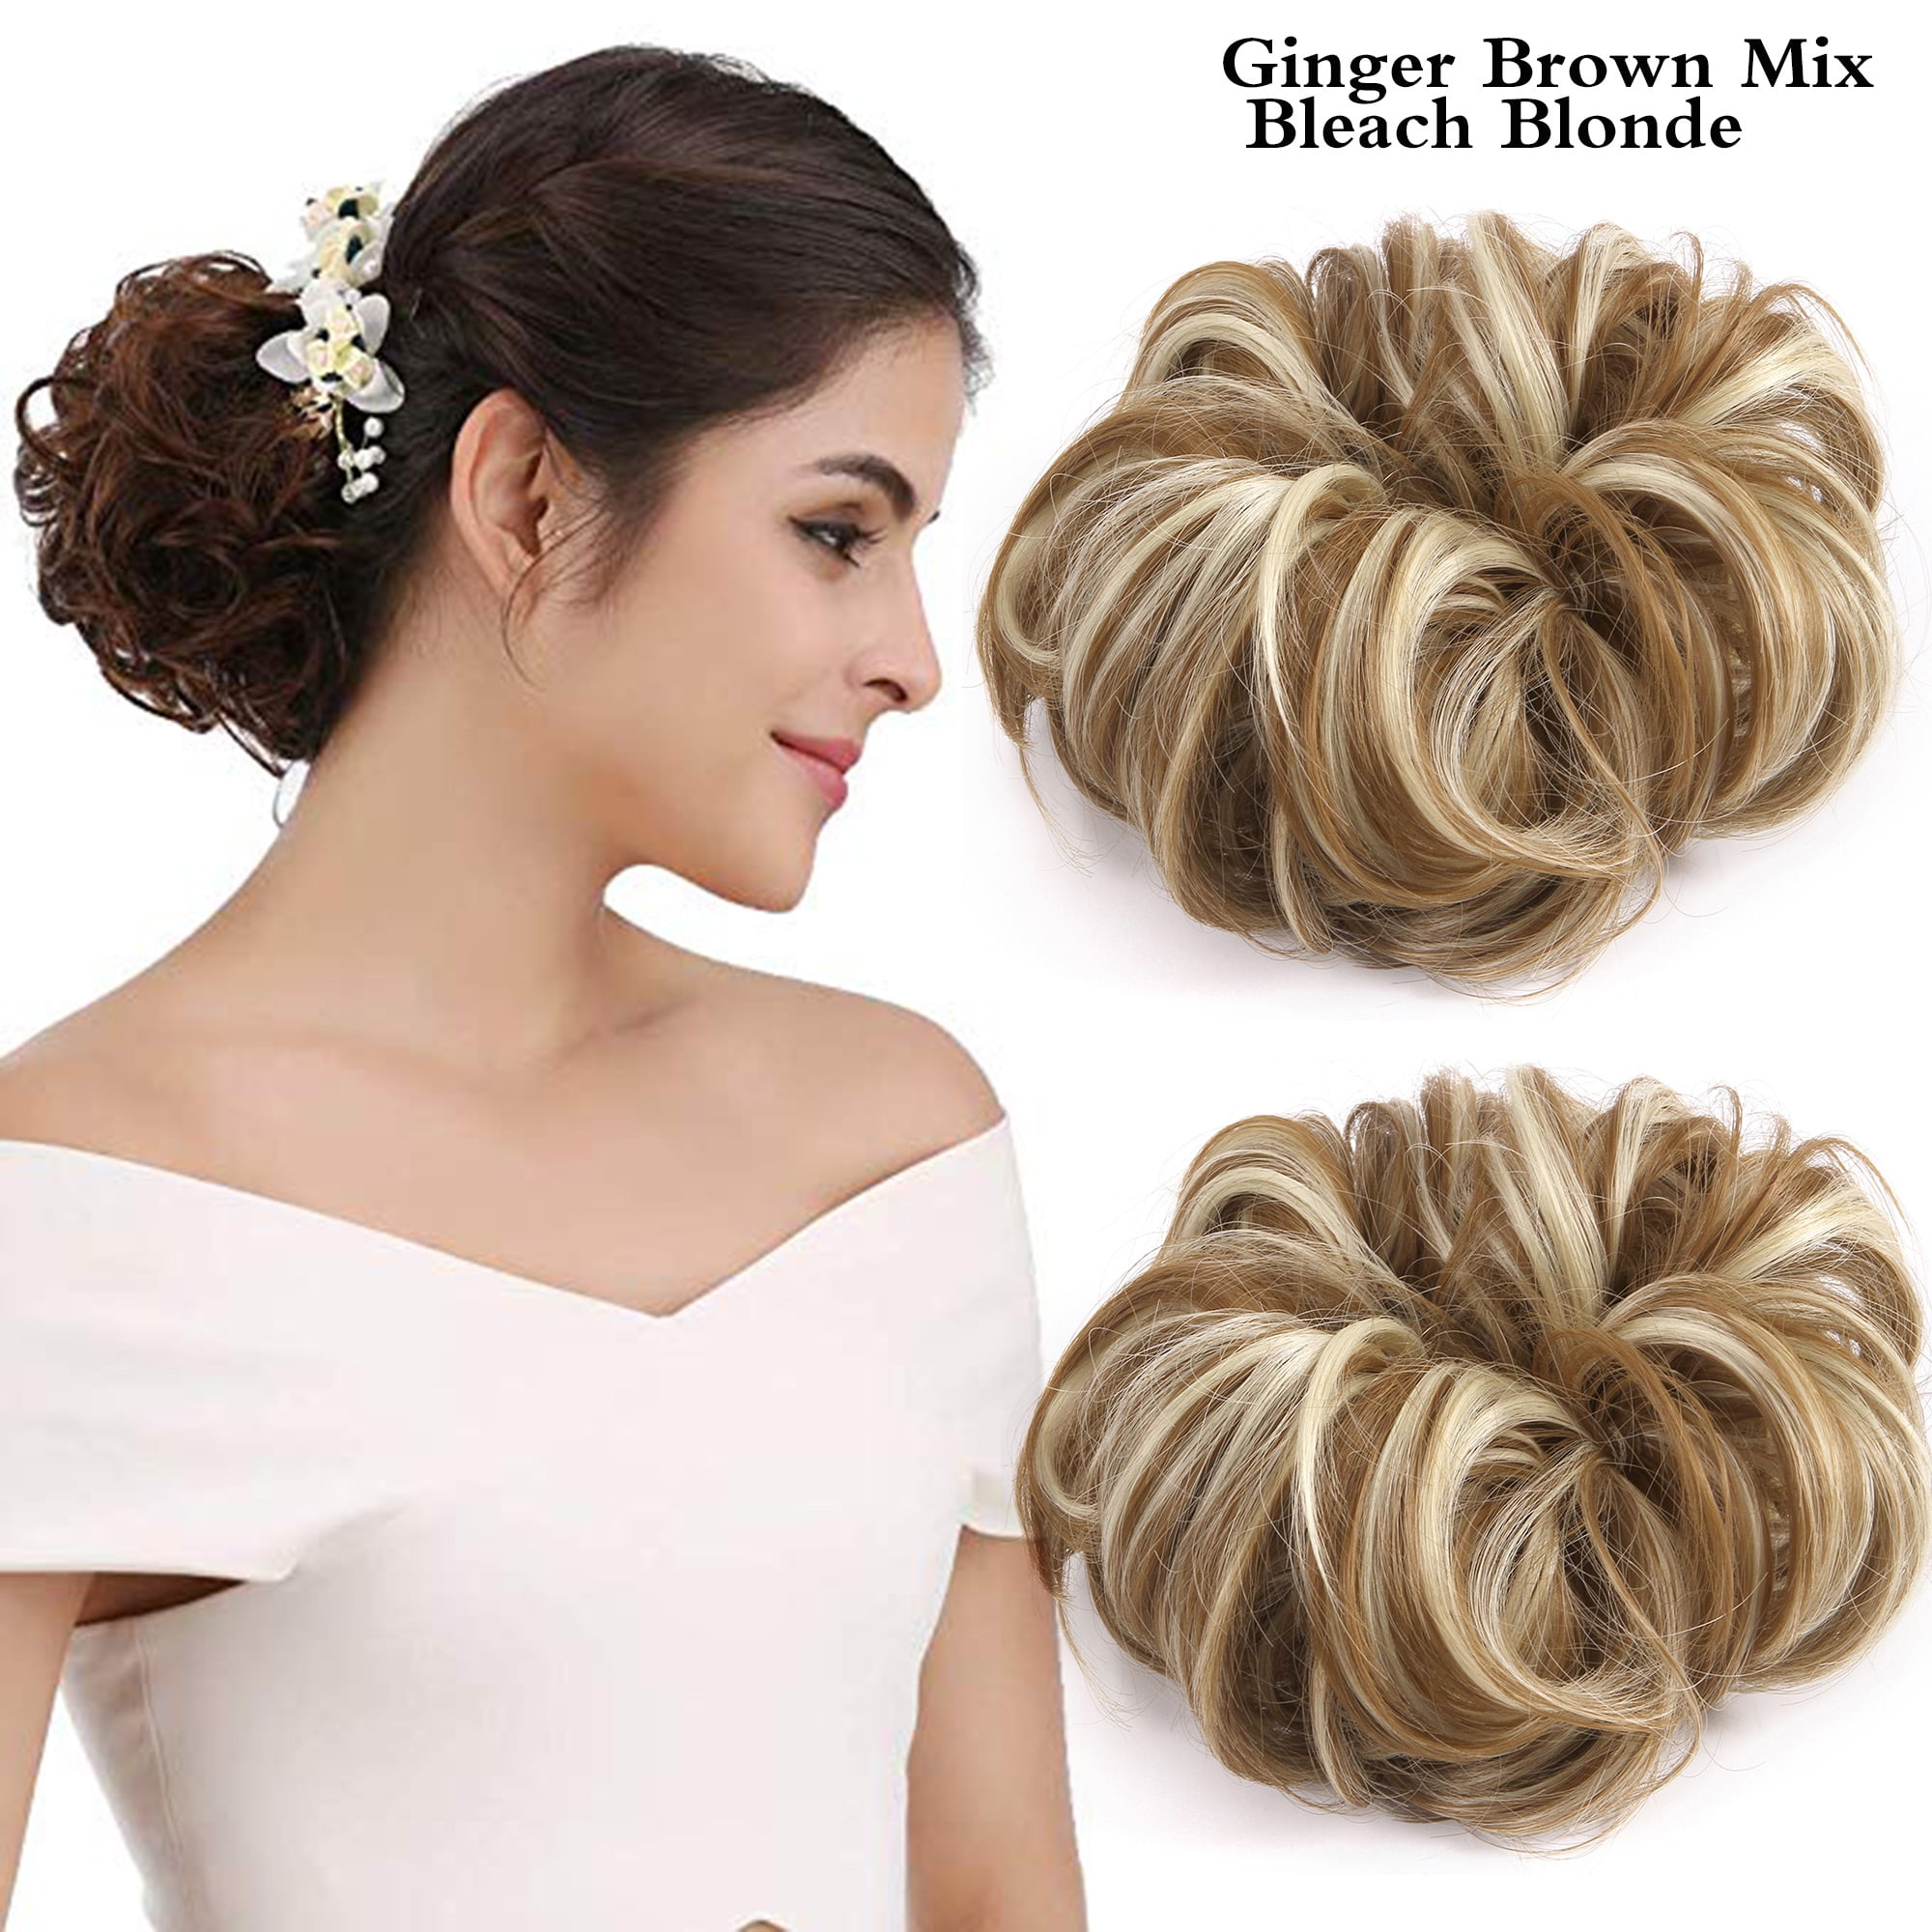 updo hair pieces,OFF 80%,www.concordehotels.com.tr